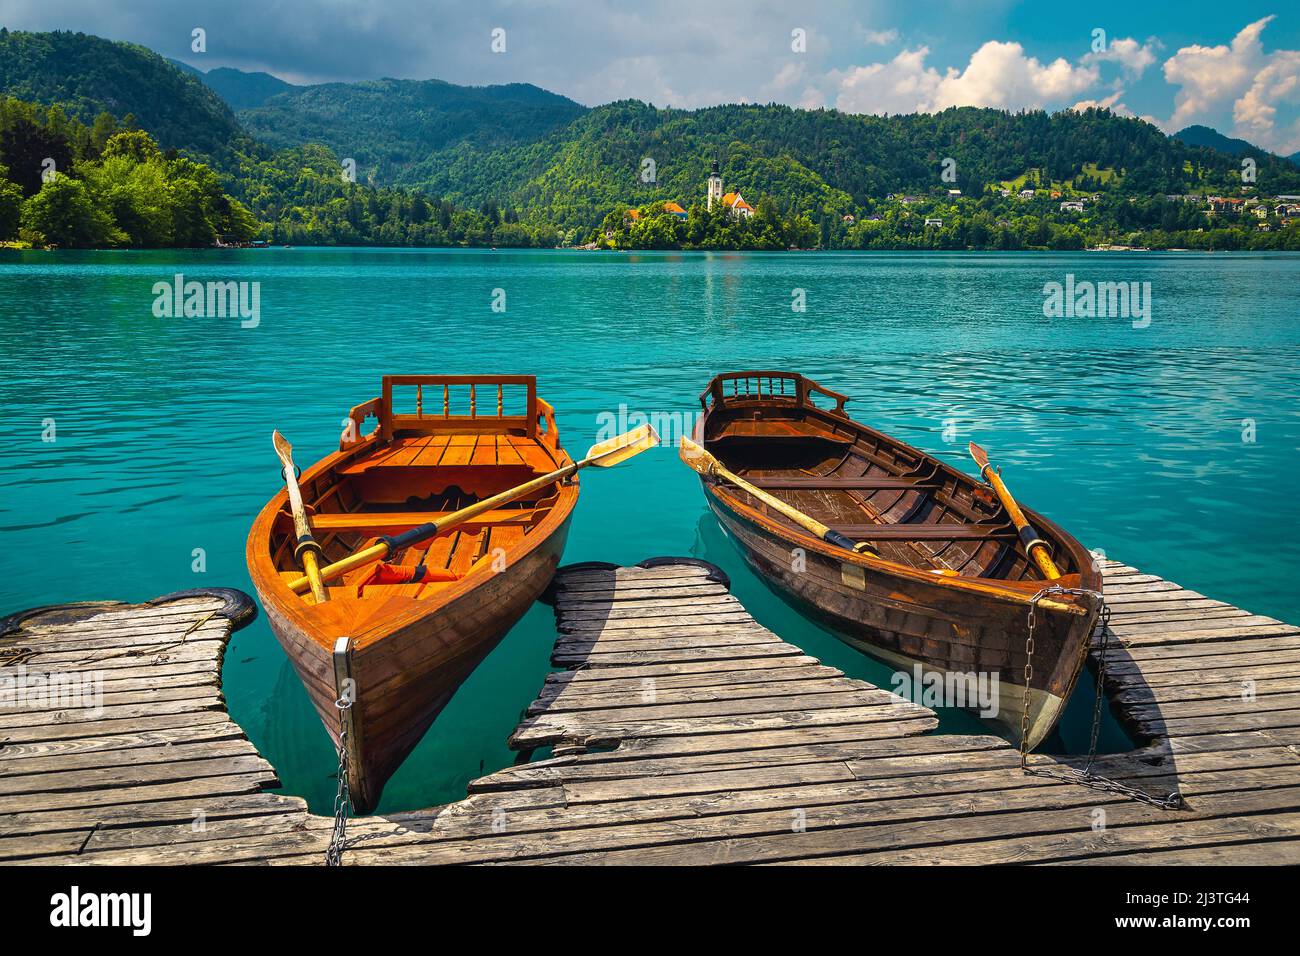 Wooden rowing boats moored at the pier. Rowing boats on the lake Bled and Pilgrimage church with small island in background, Slovenia, Europe Stock Photo